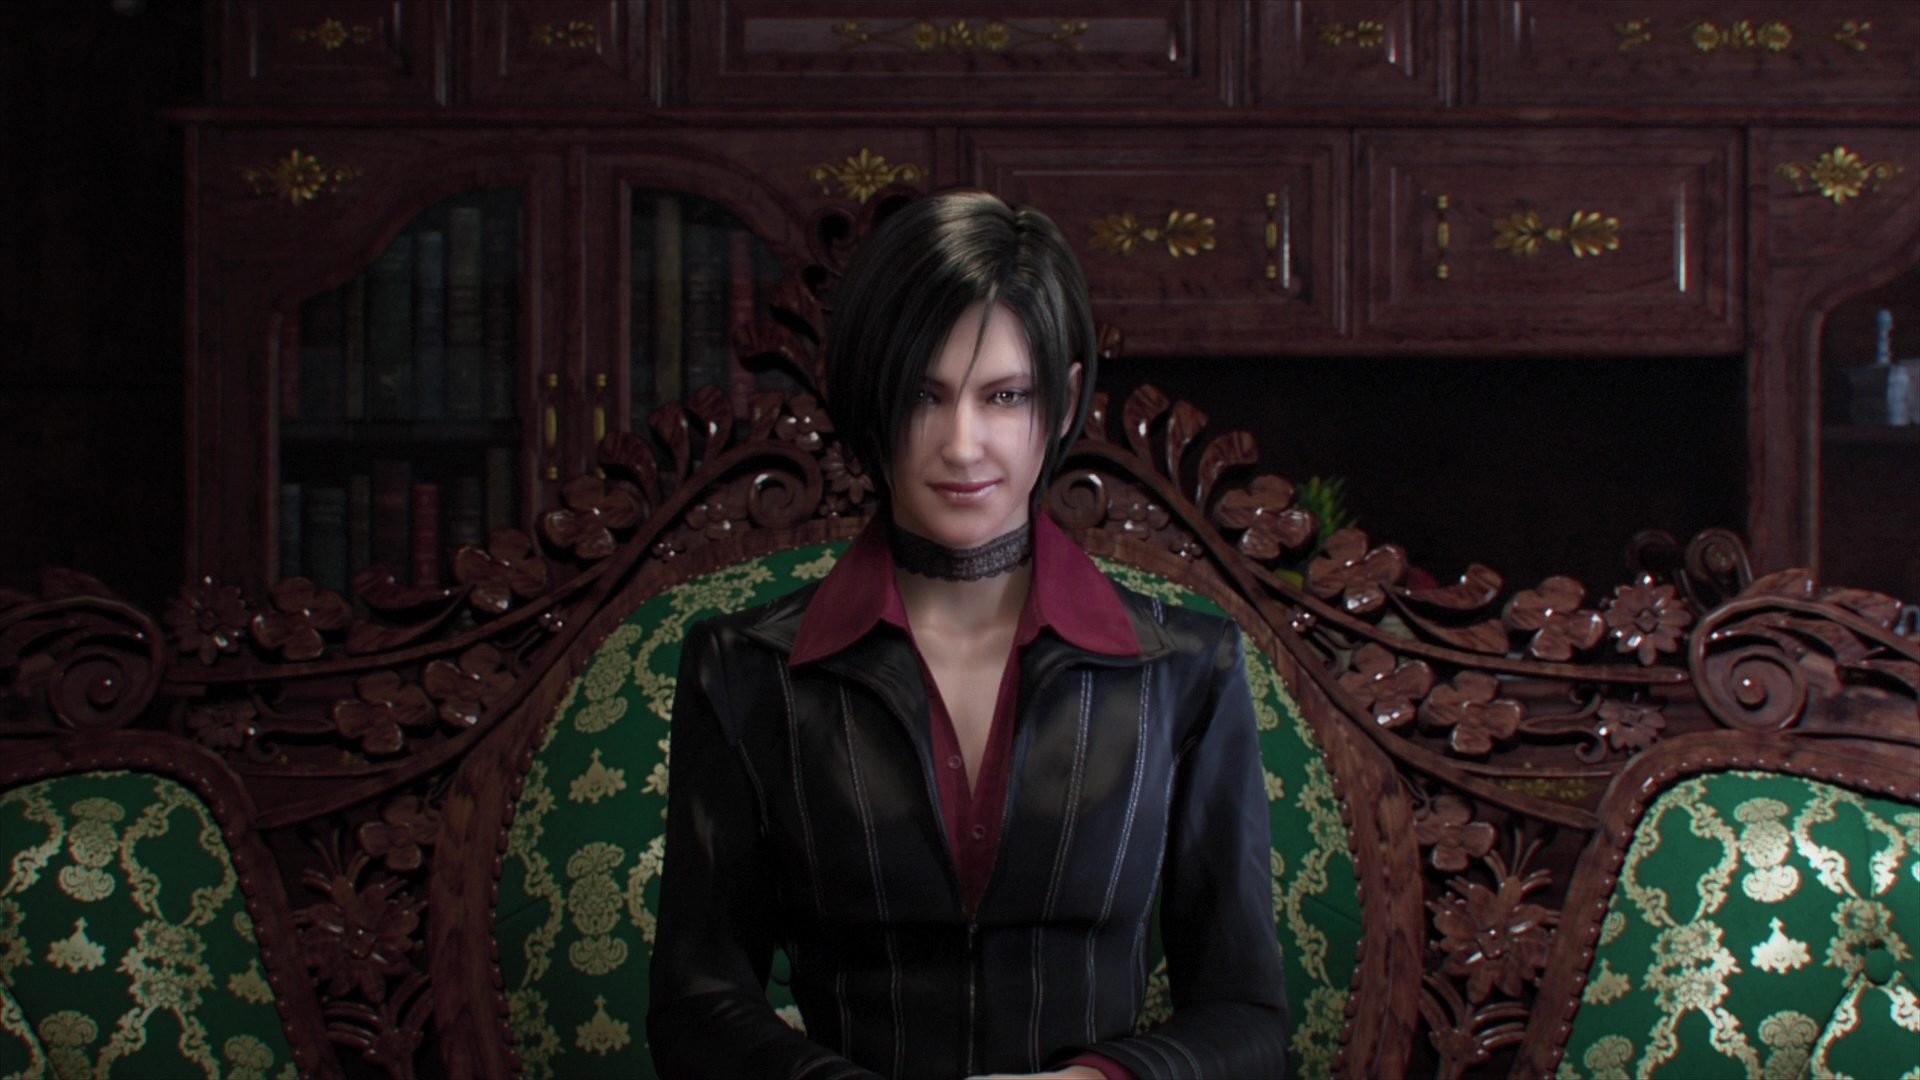 1920x1080 Resident Evil, Ada wong HD Wallpapers / Desktop and Mobile Images & Photos